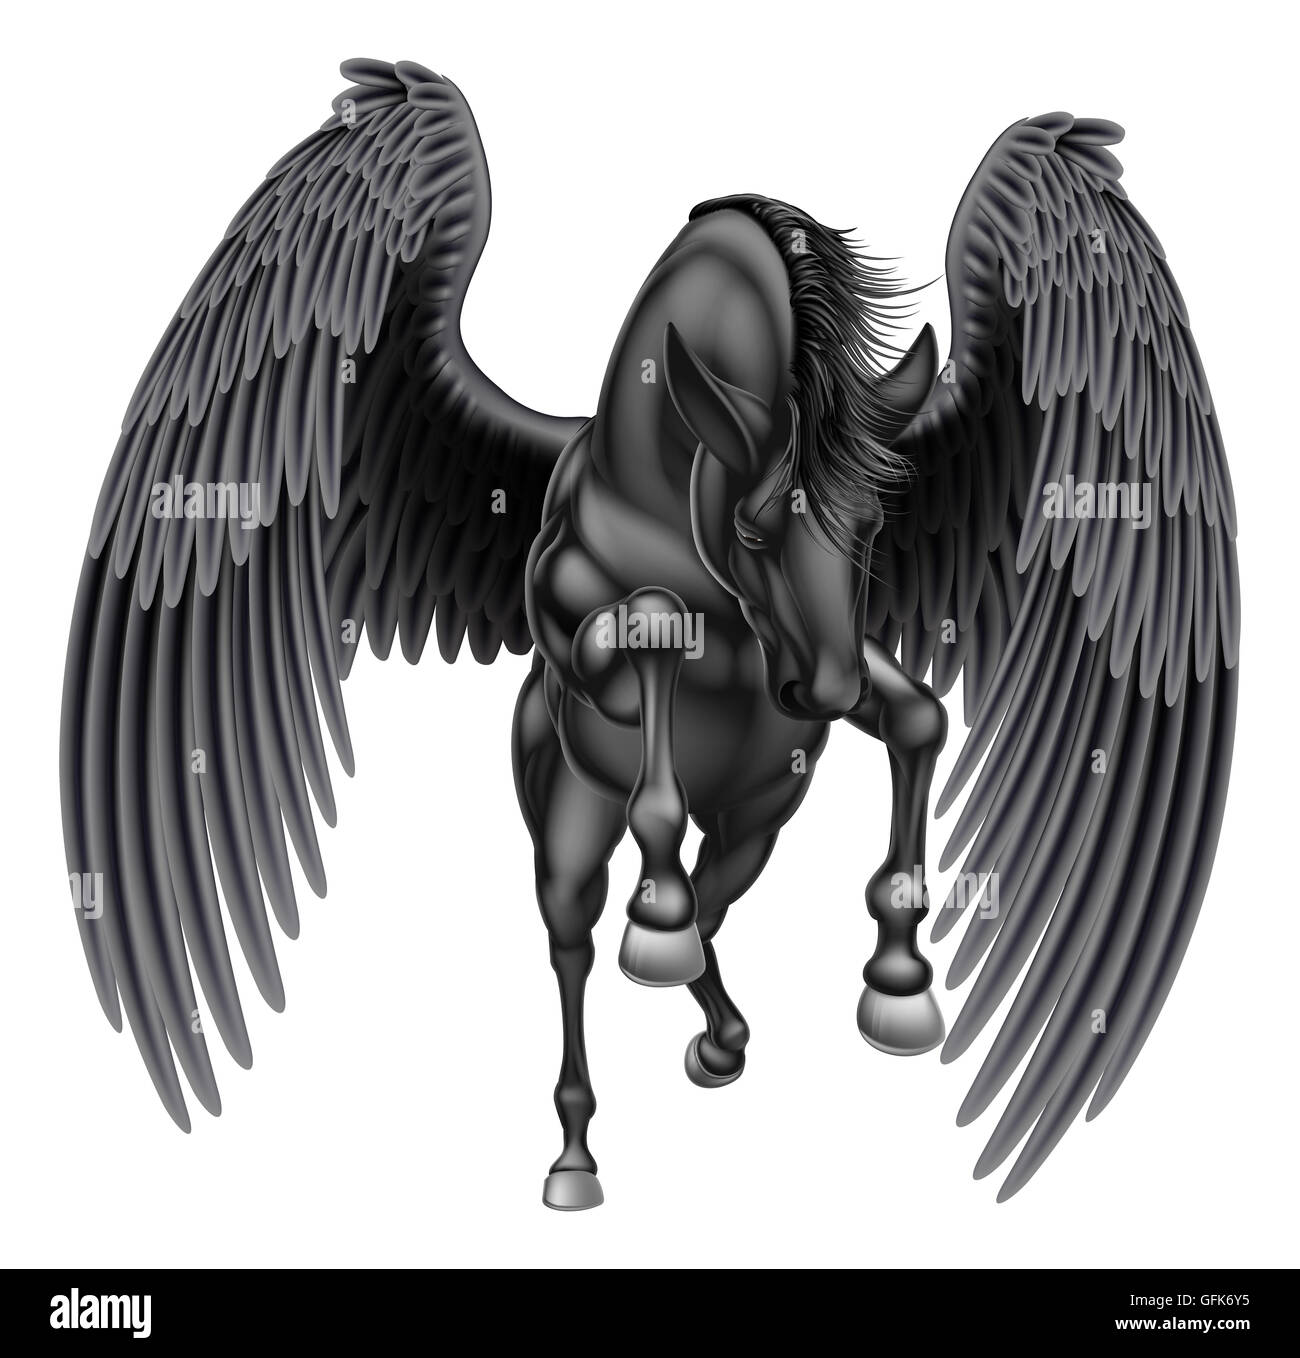 An illustration of a black pegasus mythological winged horse rearing on its hind legs or running or jumping seen from the front Stock Photo